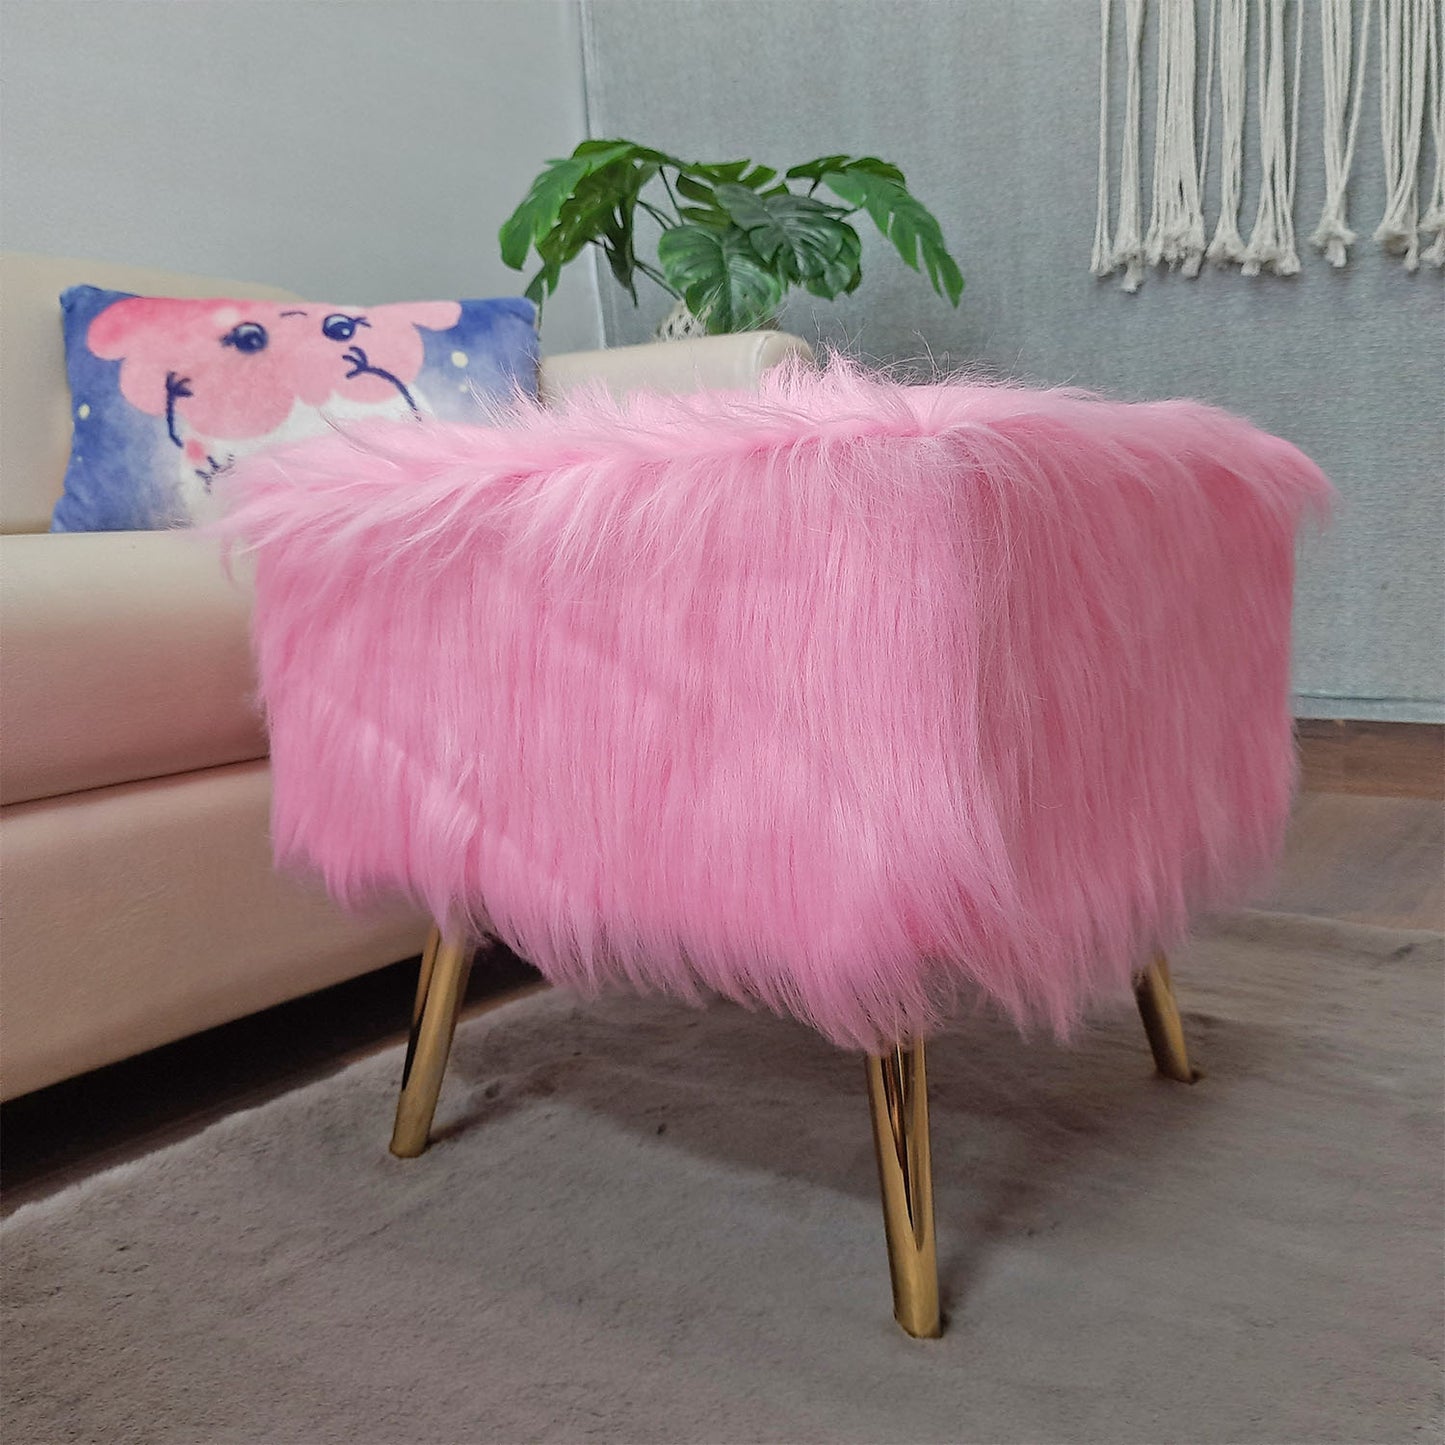 Noviato Collection – Pink Premium Long Faux Fur Footstool Gold Metal Legs Modern On-Trend Style Square Multi-Functional Ottoman Stool Seat, 40 cm Tall | from Avioni